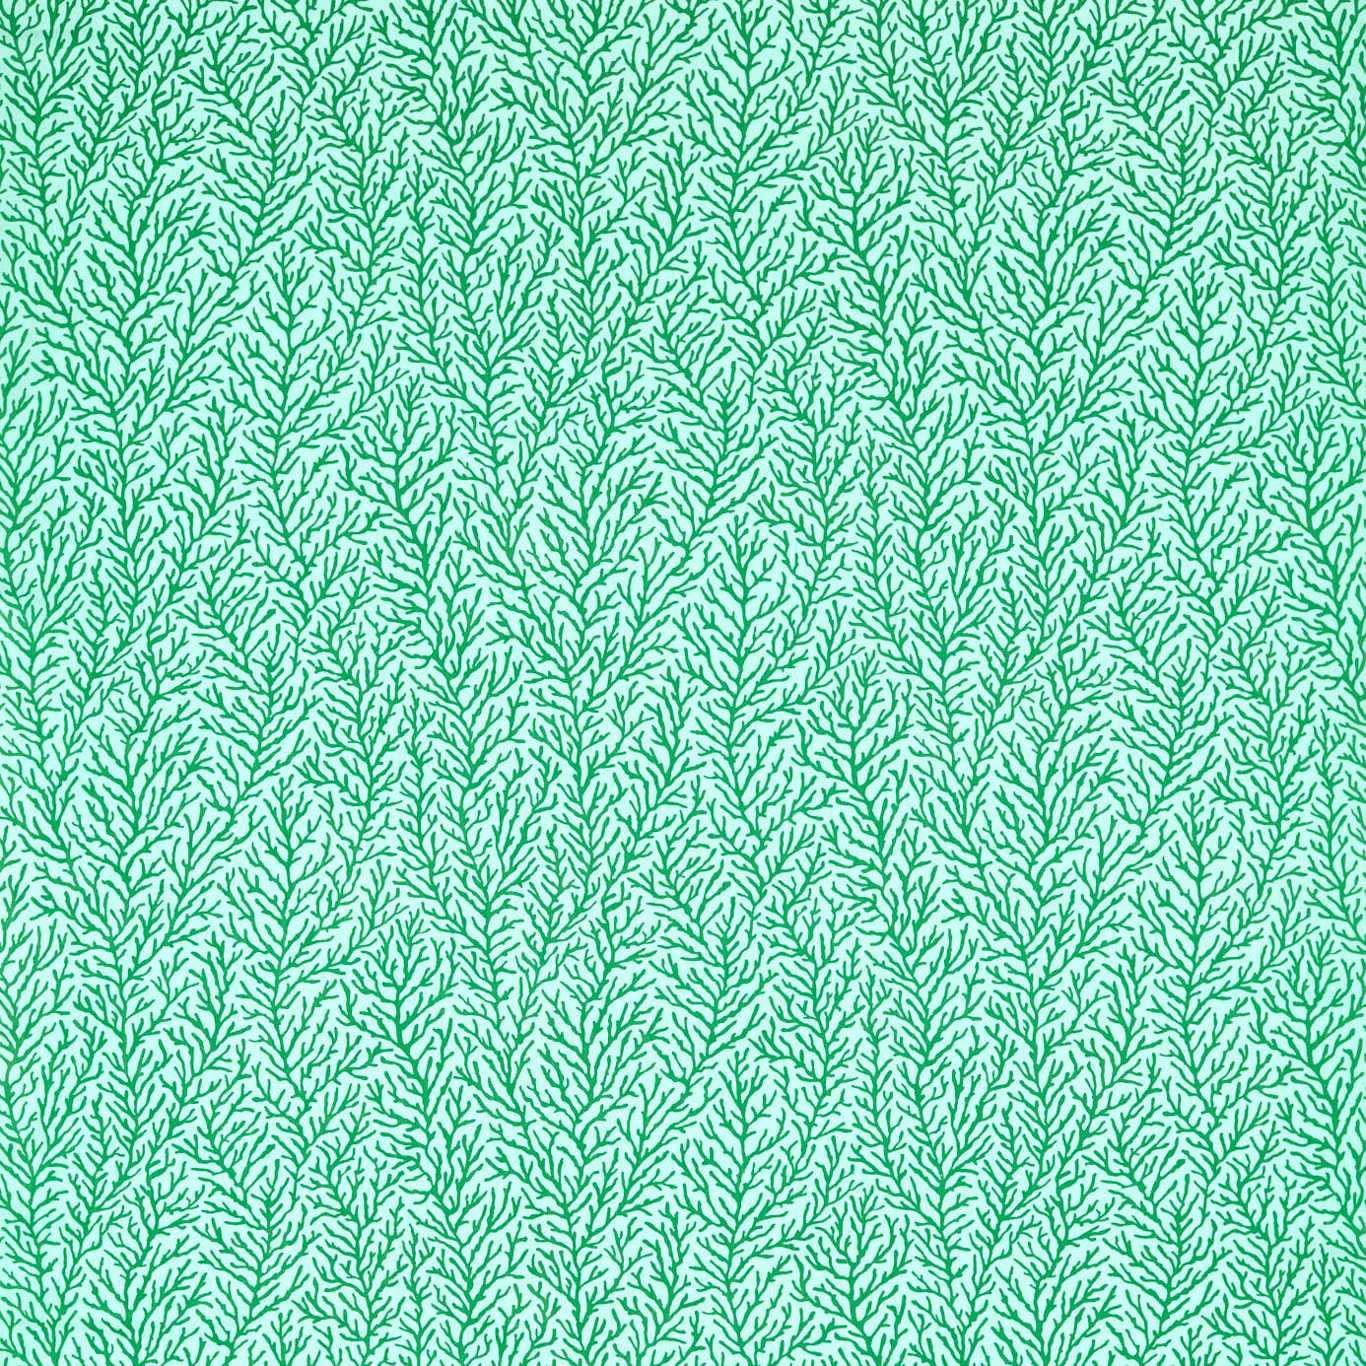 Atoll Fabric by Harlequin - HTEF120999 - Seaglass/ Emerald